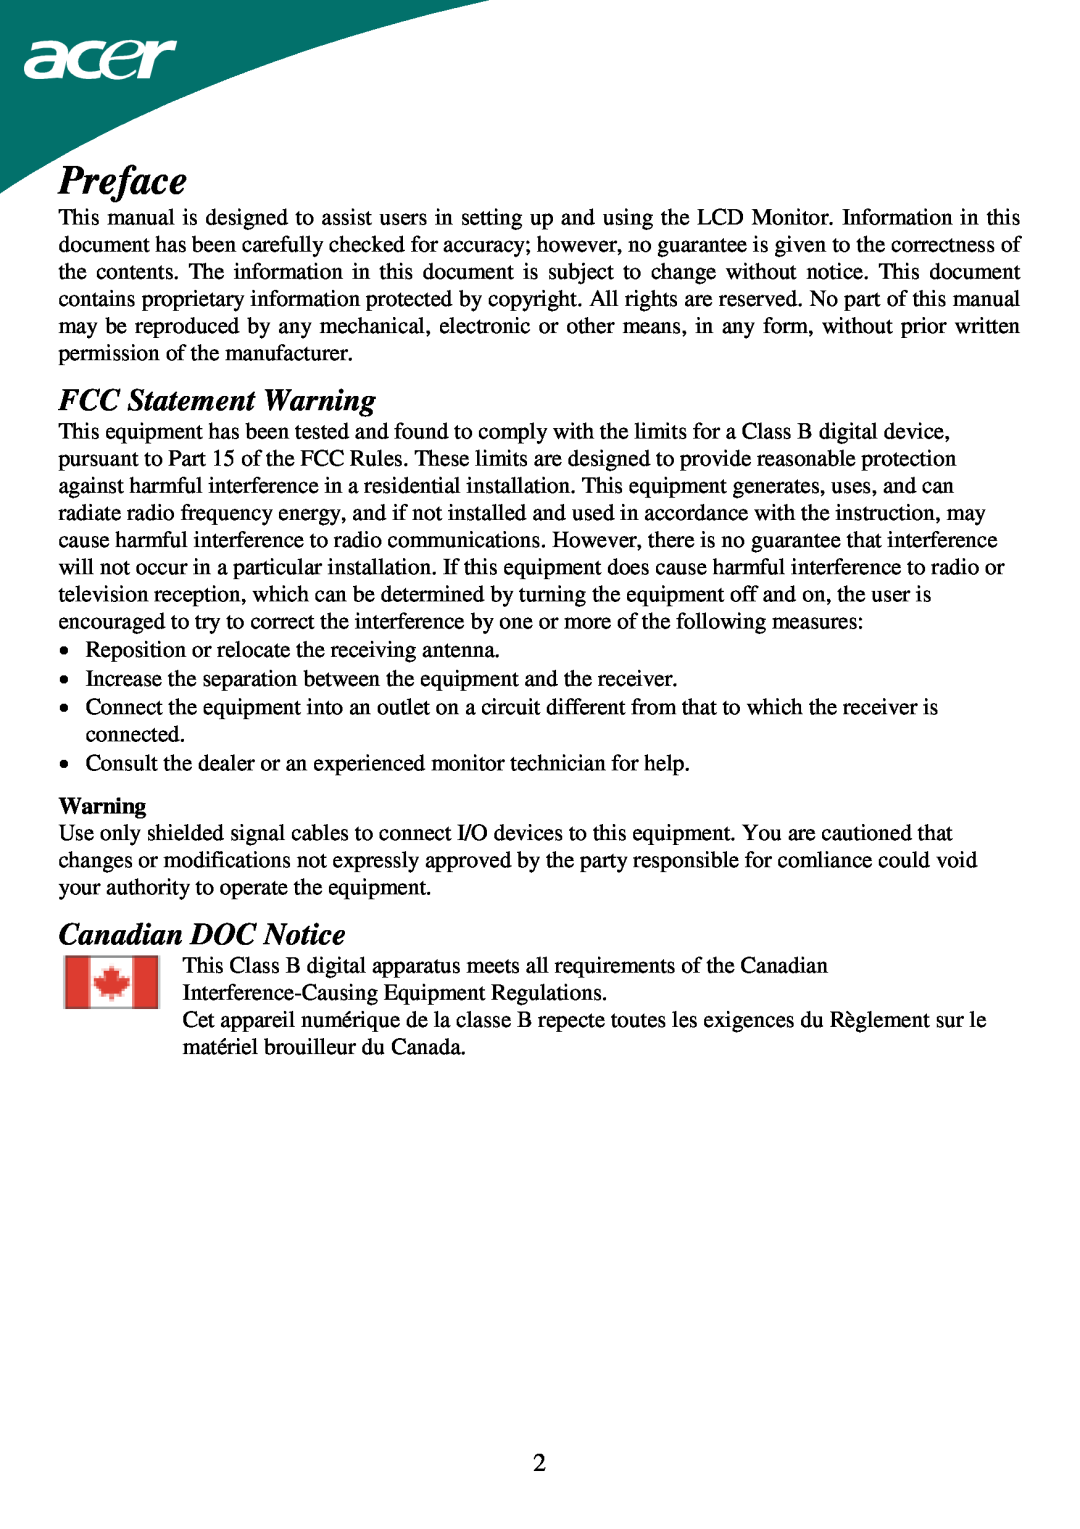 Acer AL1715 important safety instructions Preface, FCC Statement Warning, Canadian DOC Notice 